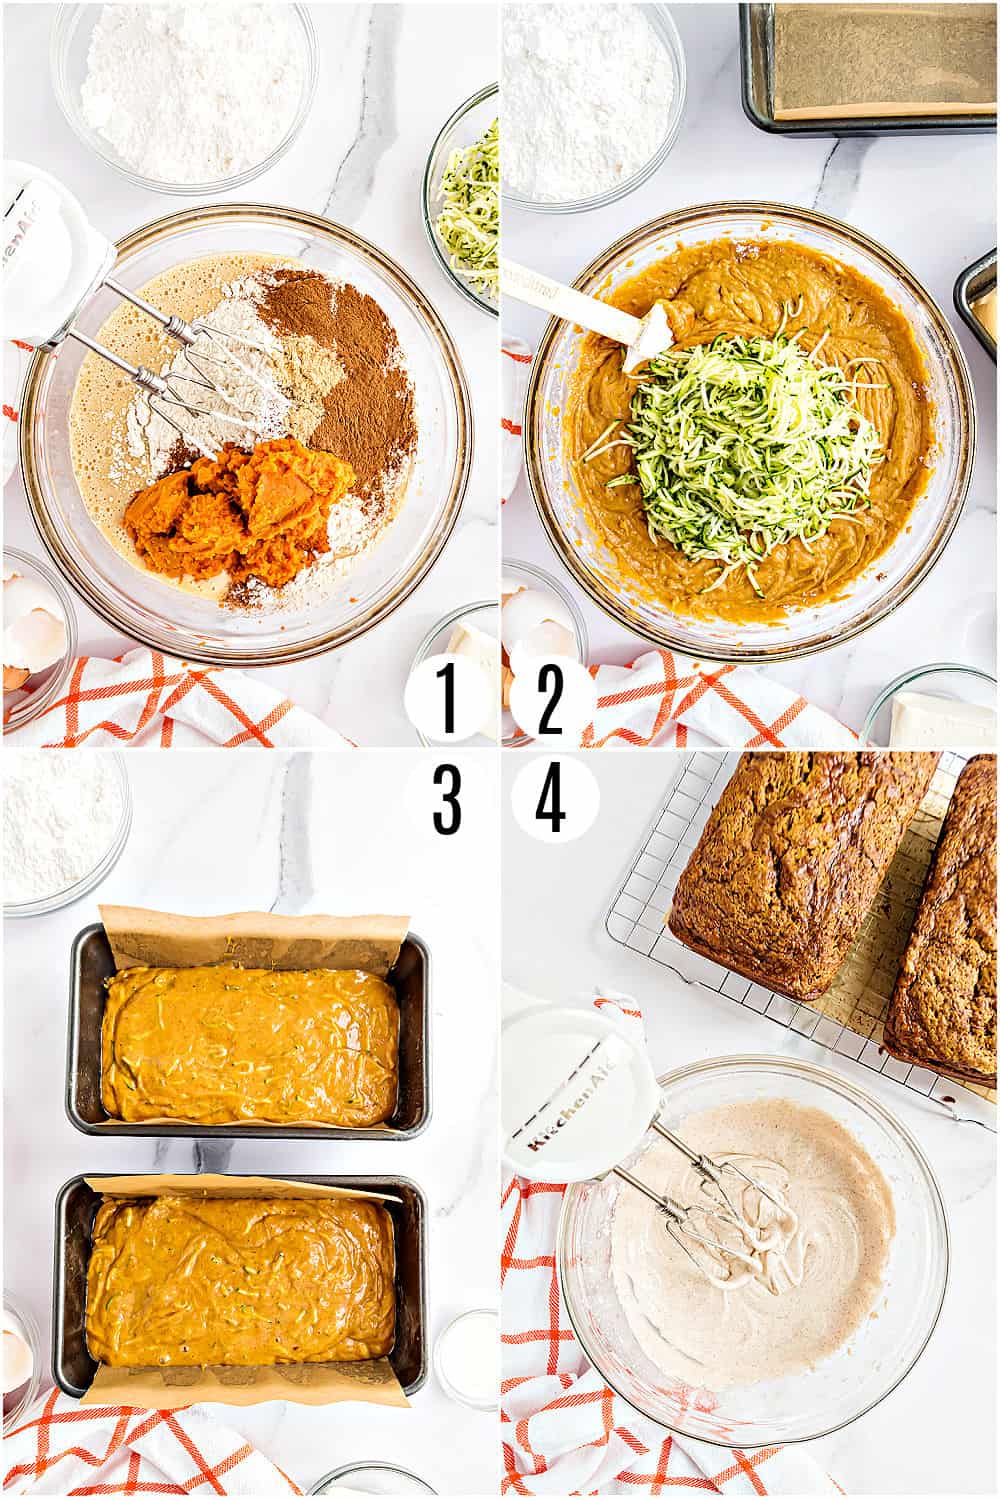 Step by step photos showing how to make pumpkin zucchini bread with cinnamon icing.